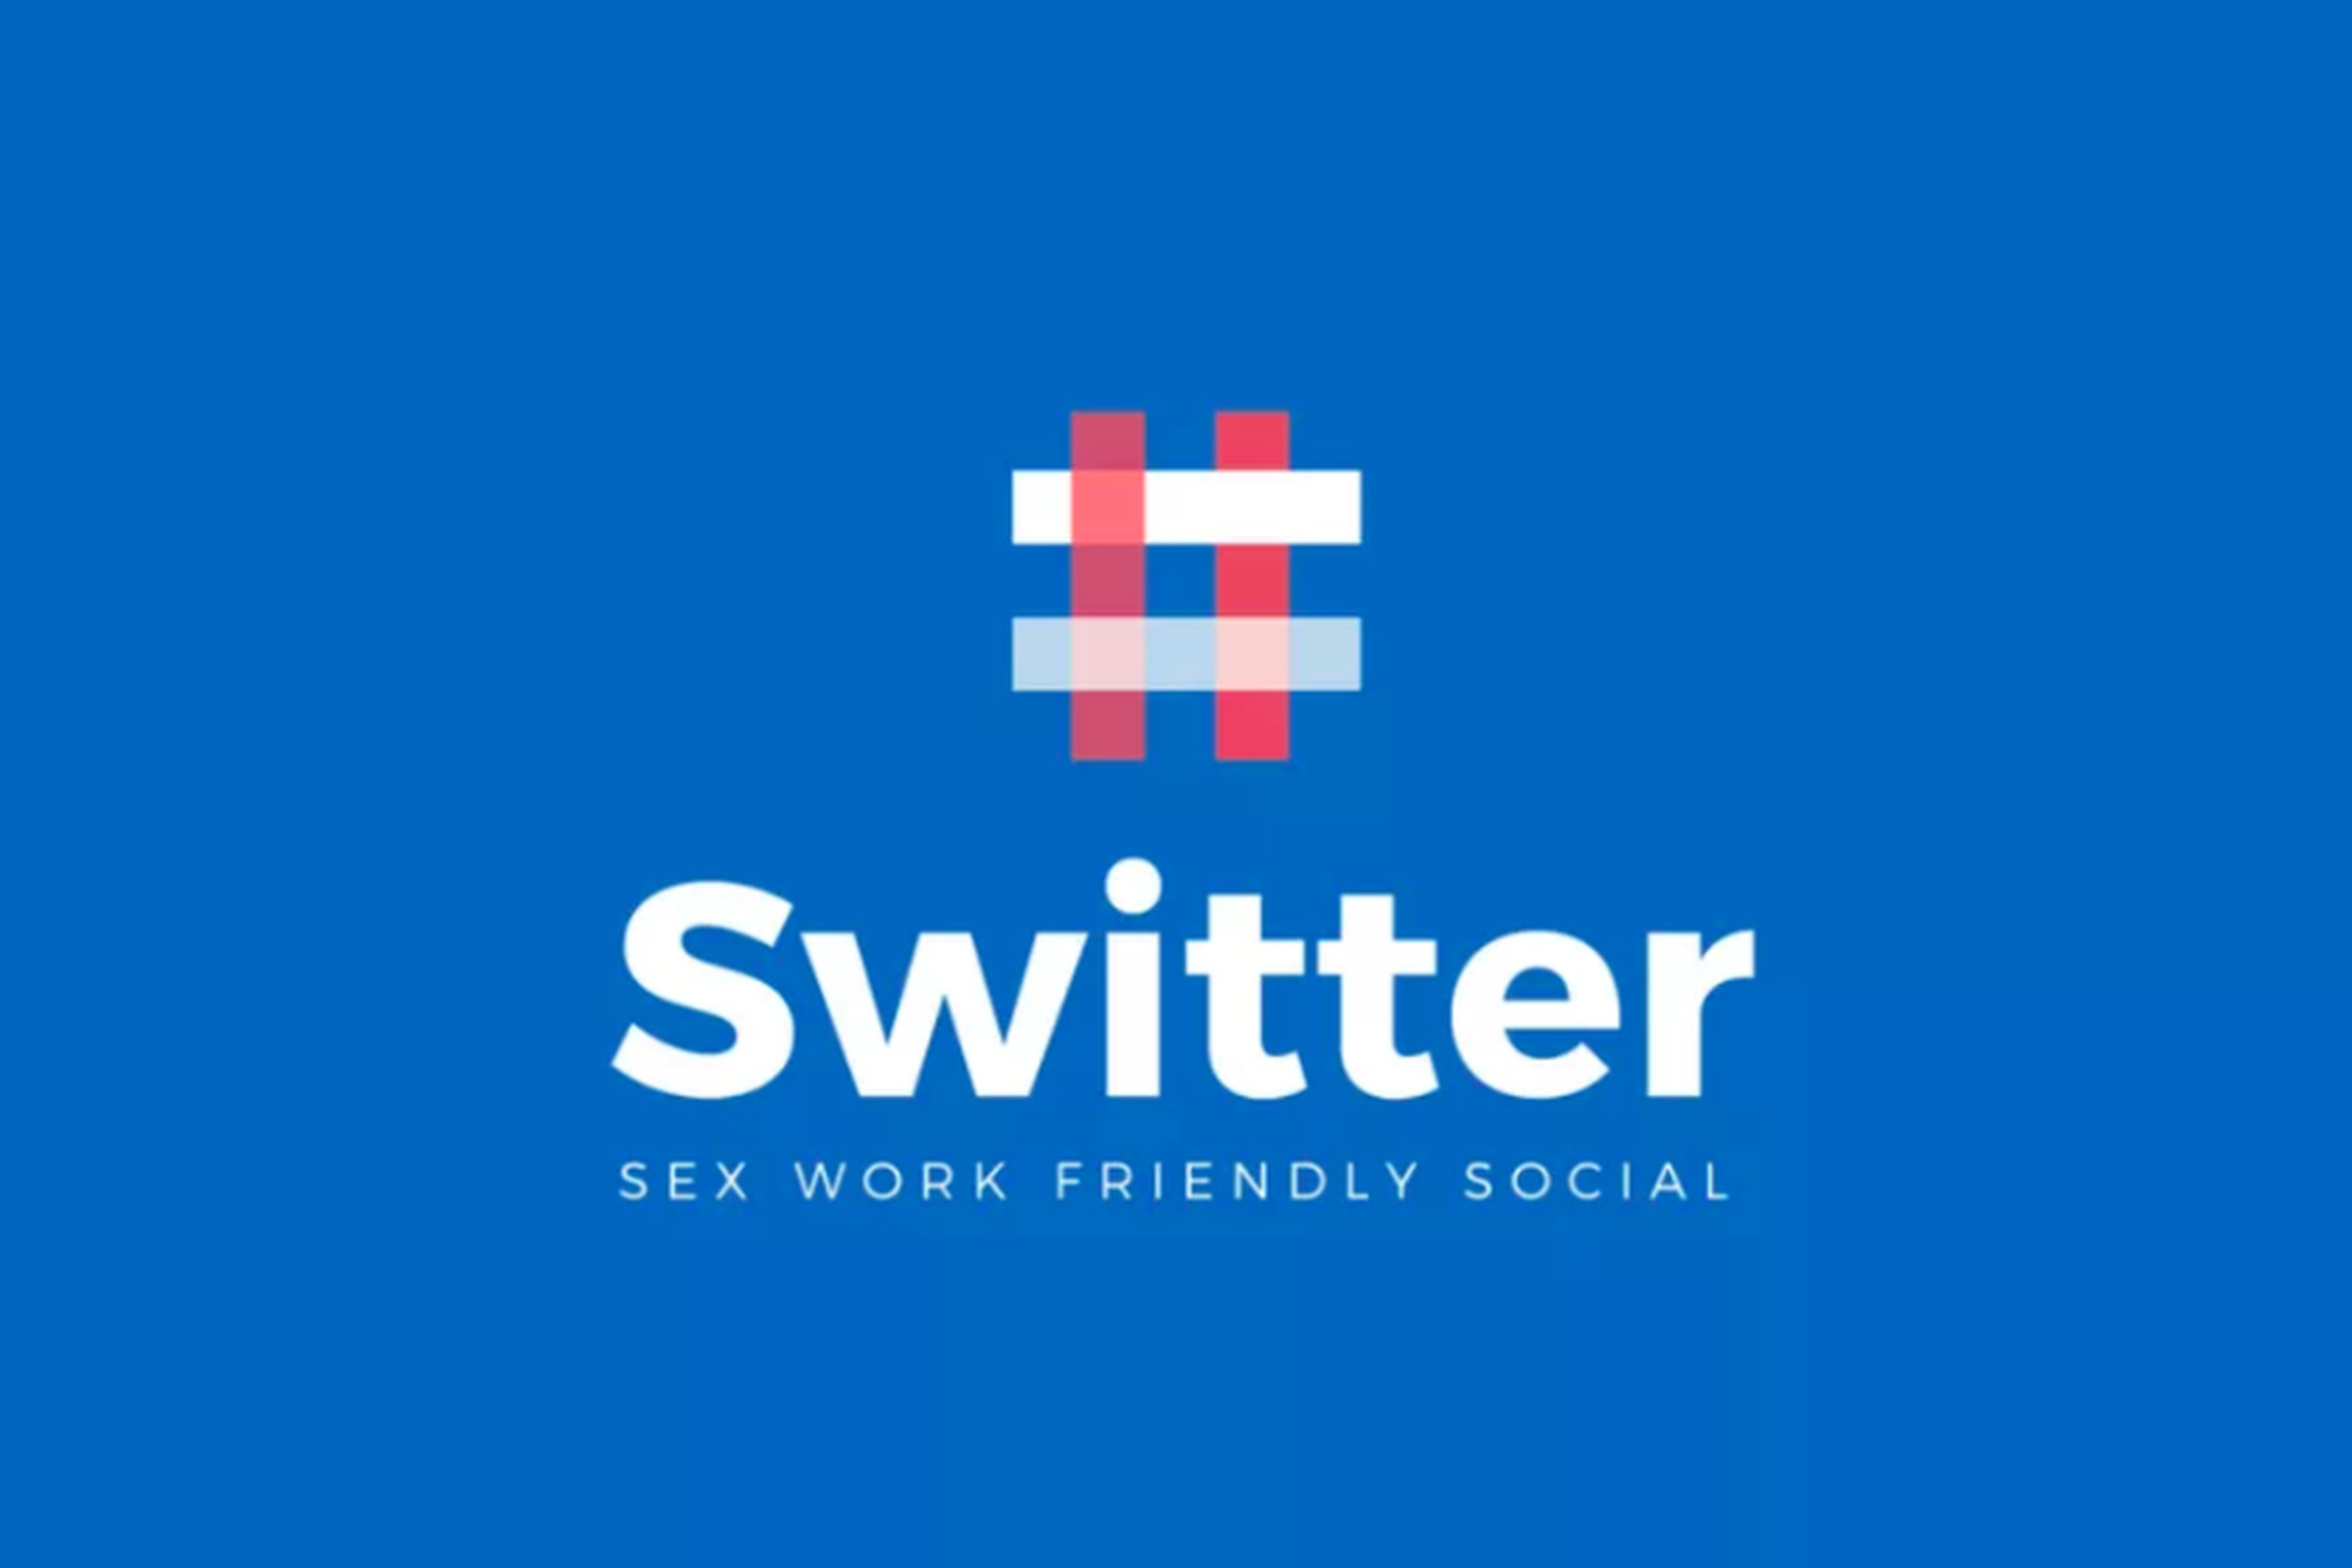 Switter, one of the last online spaces friendly to sex workers, was just ba...